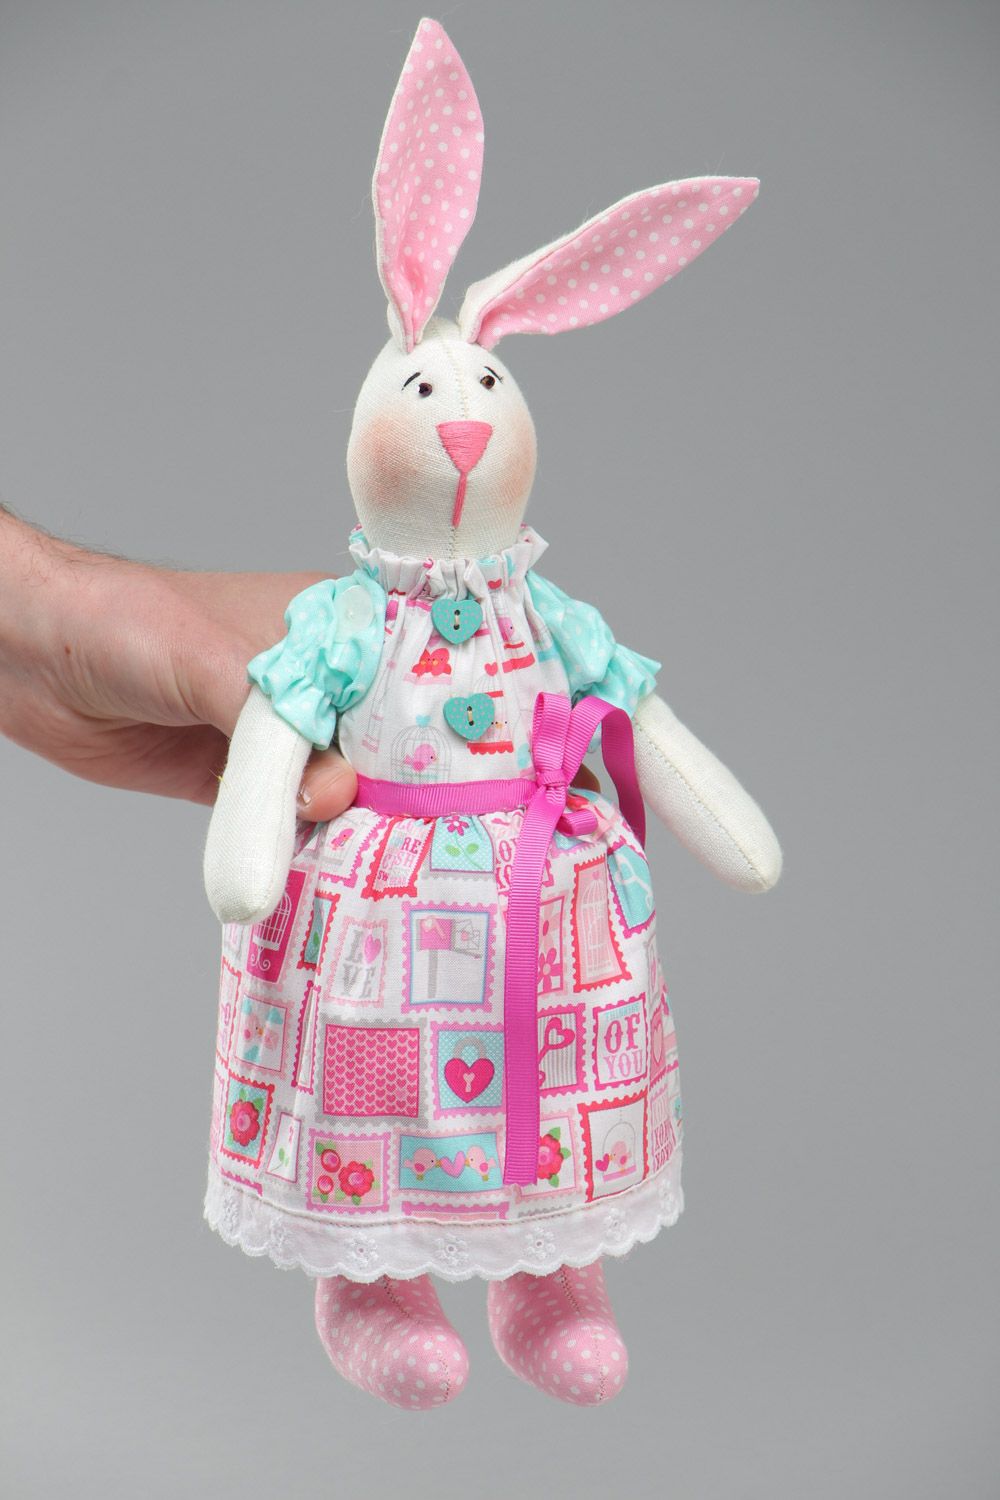 Cute handmade soft toy sewn of natural fabrics Rabbit with pink ears and dress photo 5